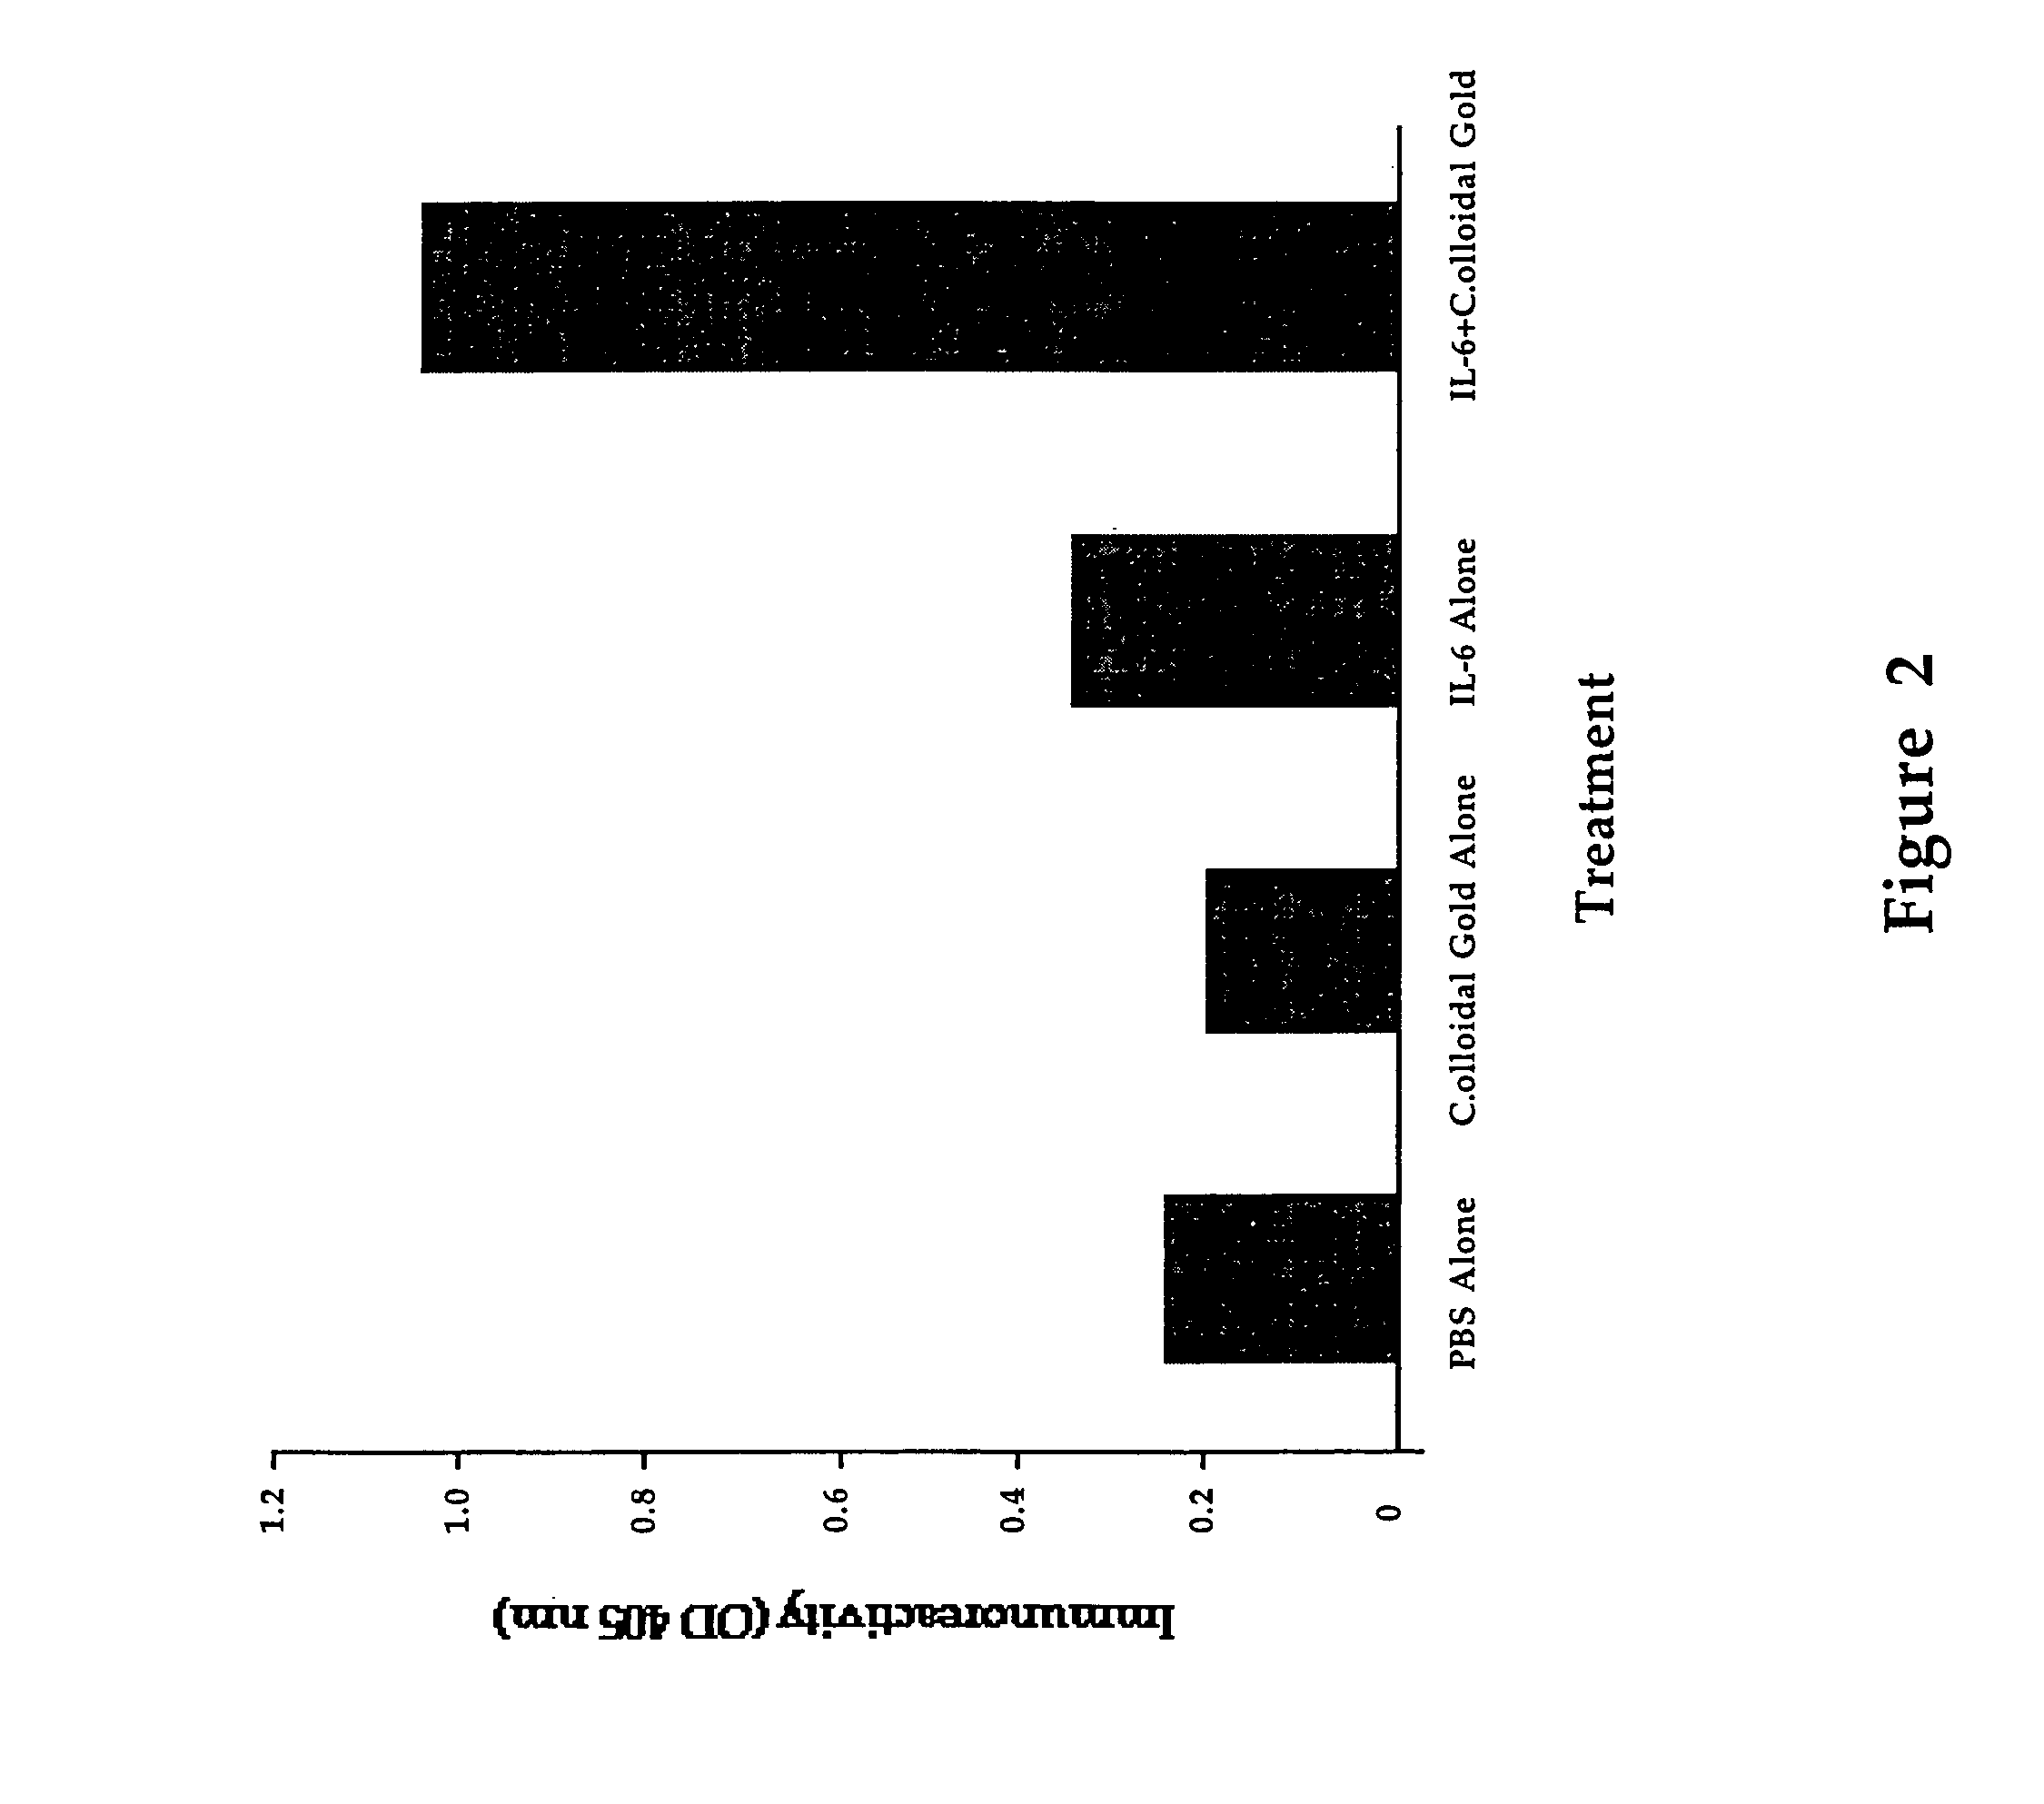 Method for delivering a cytokine using a colloidal metal